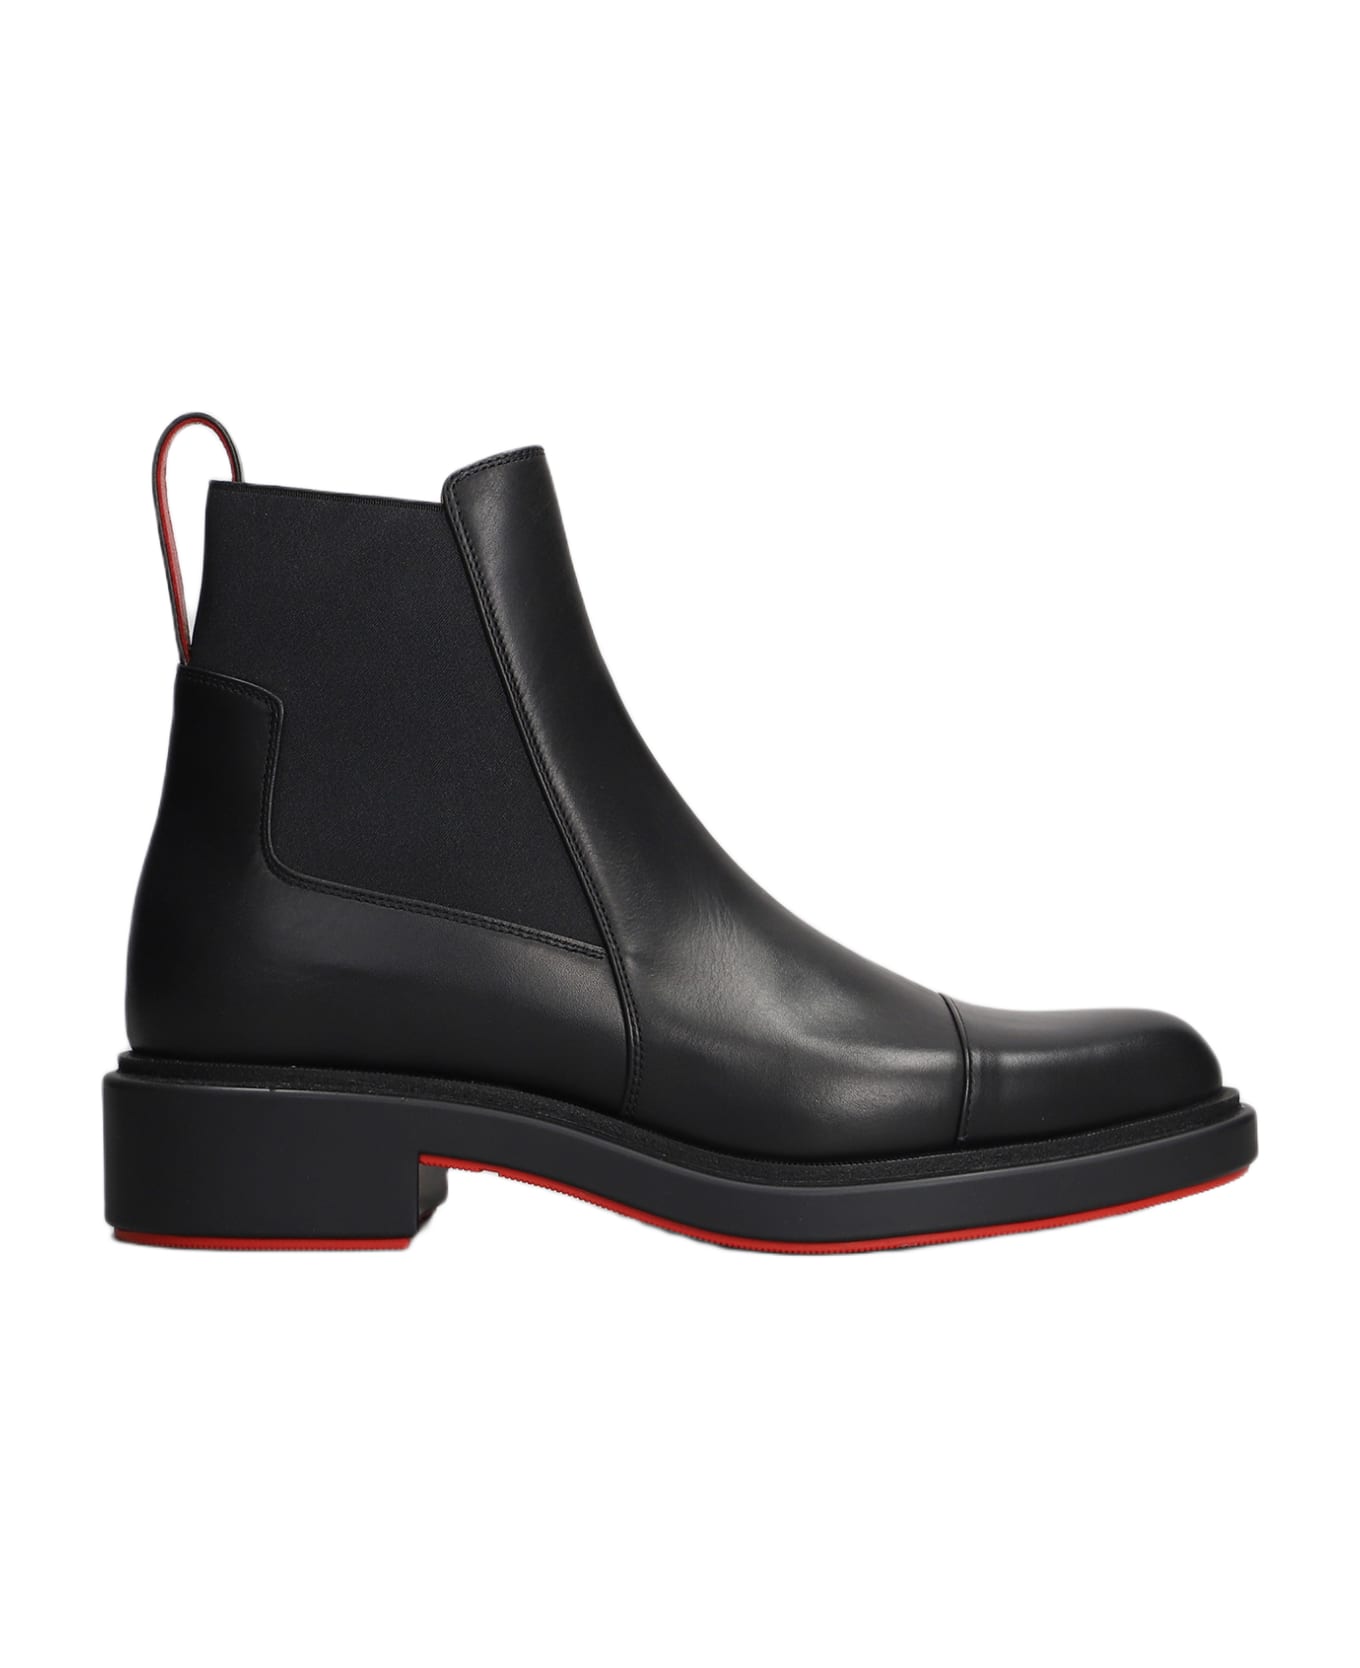 Christian Louboutin Urbino Ankle Boots In Black Leather - black ブーツ